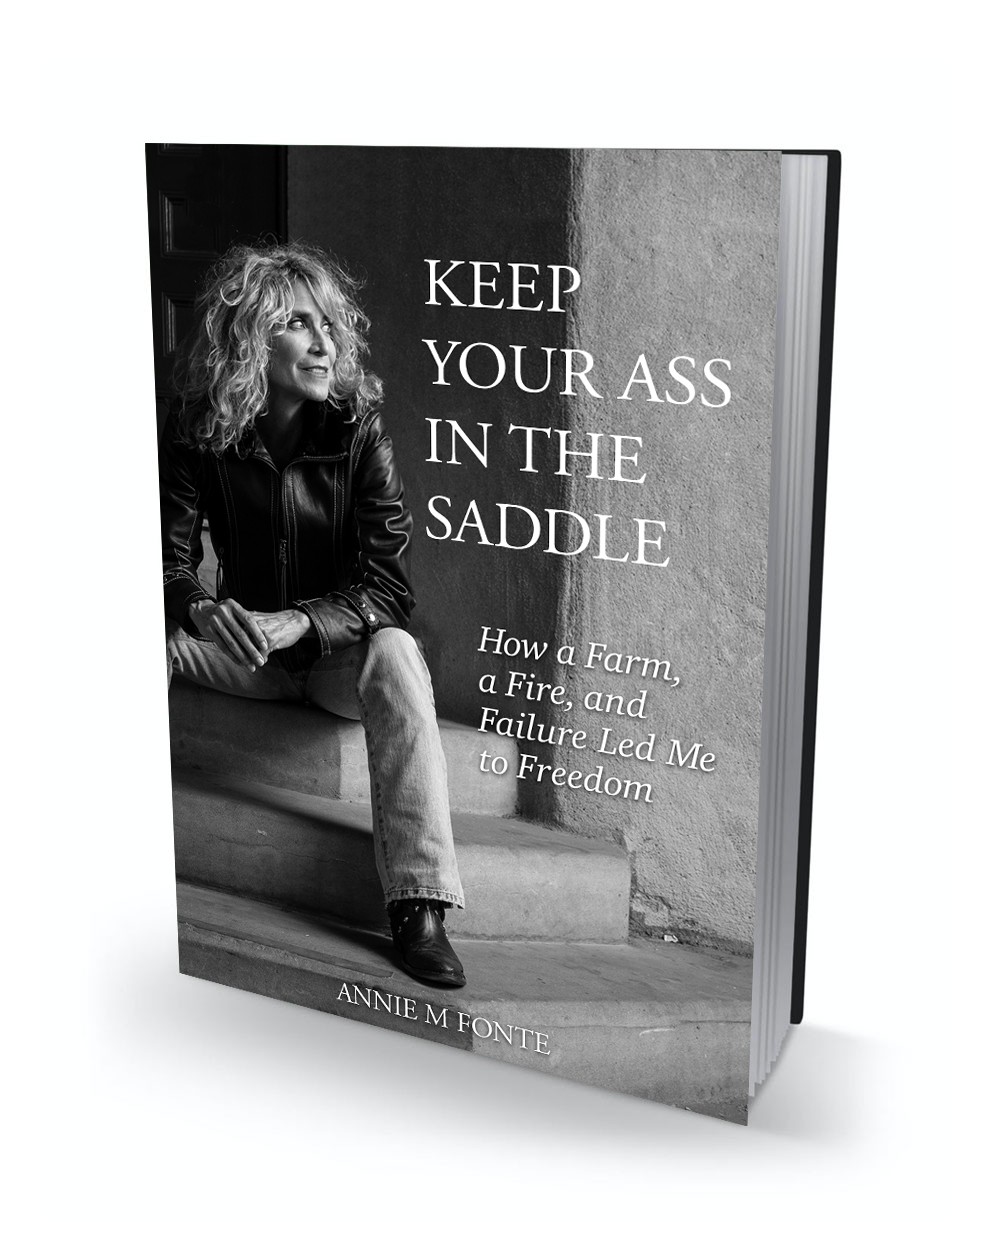 Keep Your Ass in the Saddle by Annie M Fonte